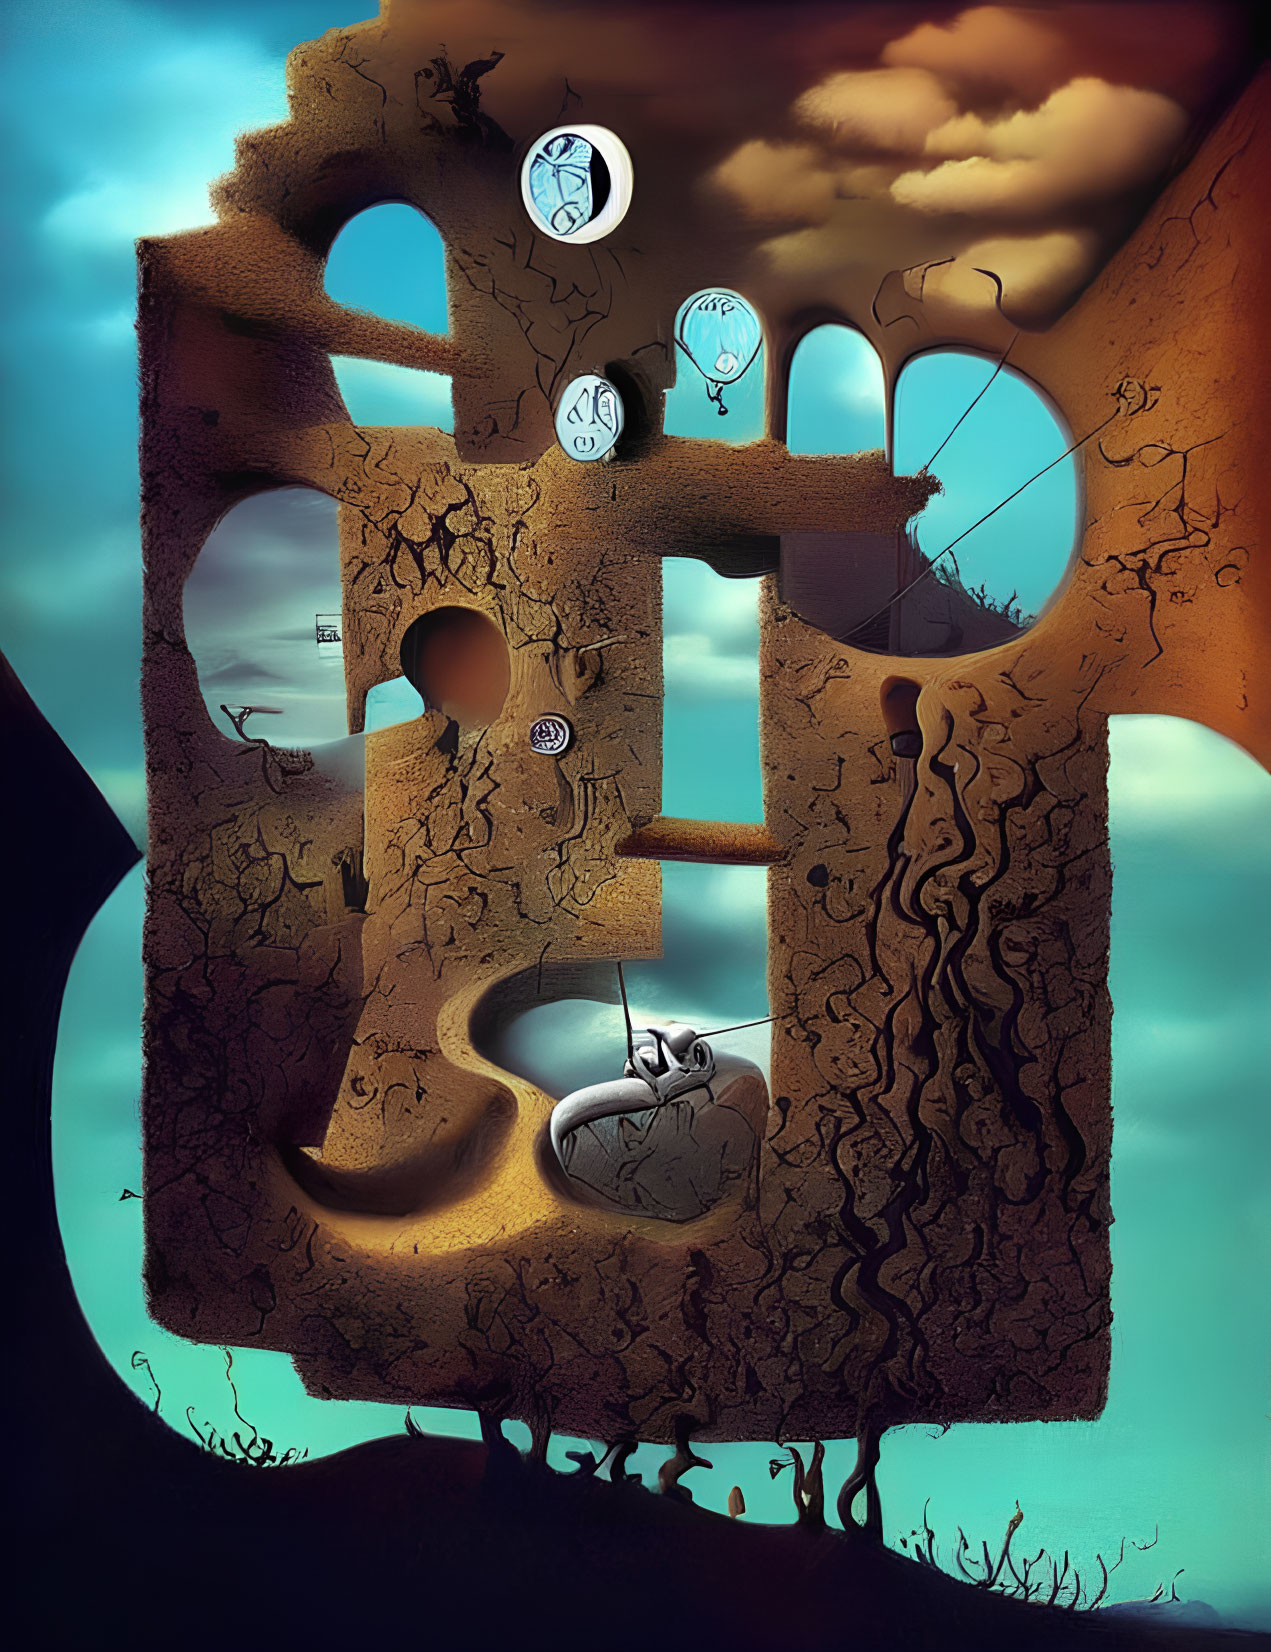 Abstract surreal artwork with clocks, winding stairs, boat, and twilight backdrop